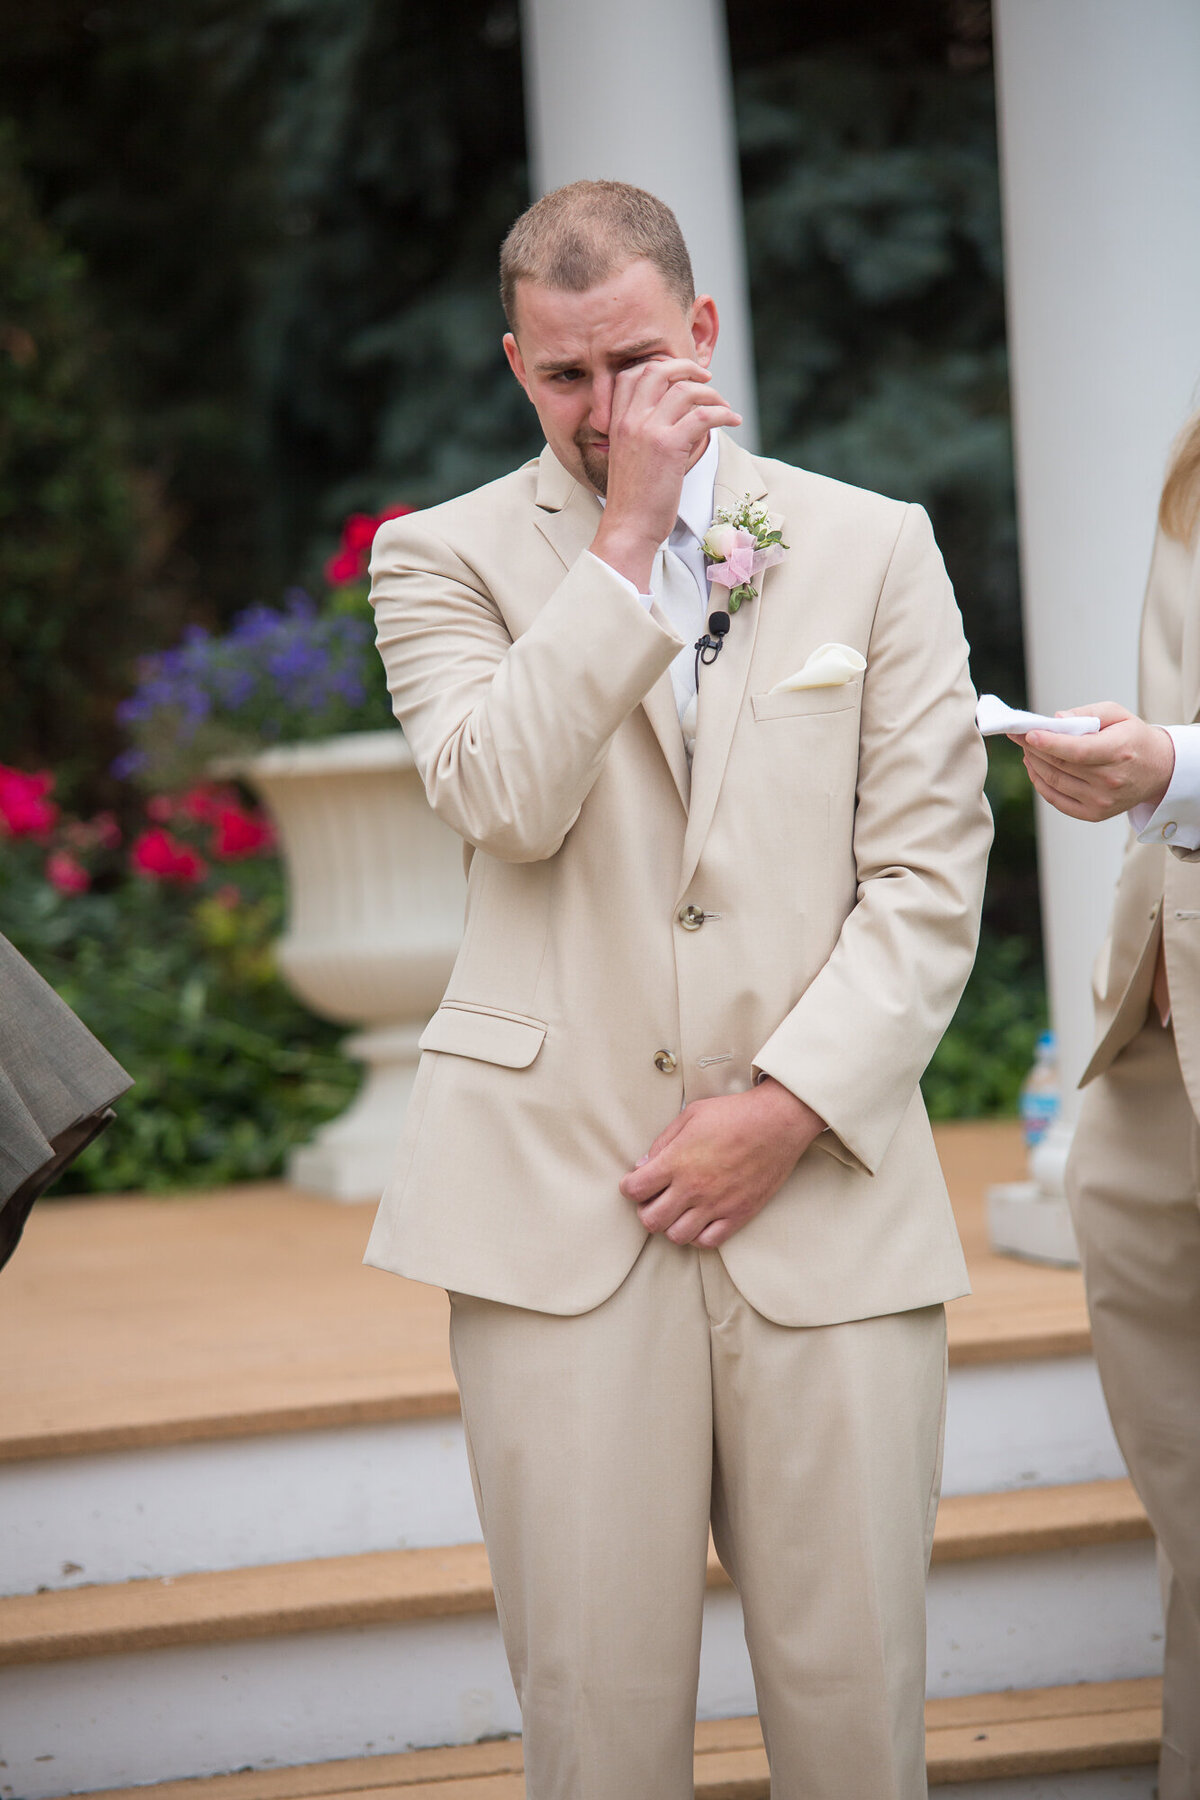 A groom cries when seeing his bride walk down the aisle in Joliet, IL.